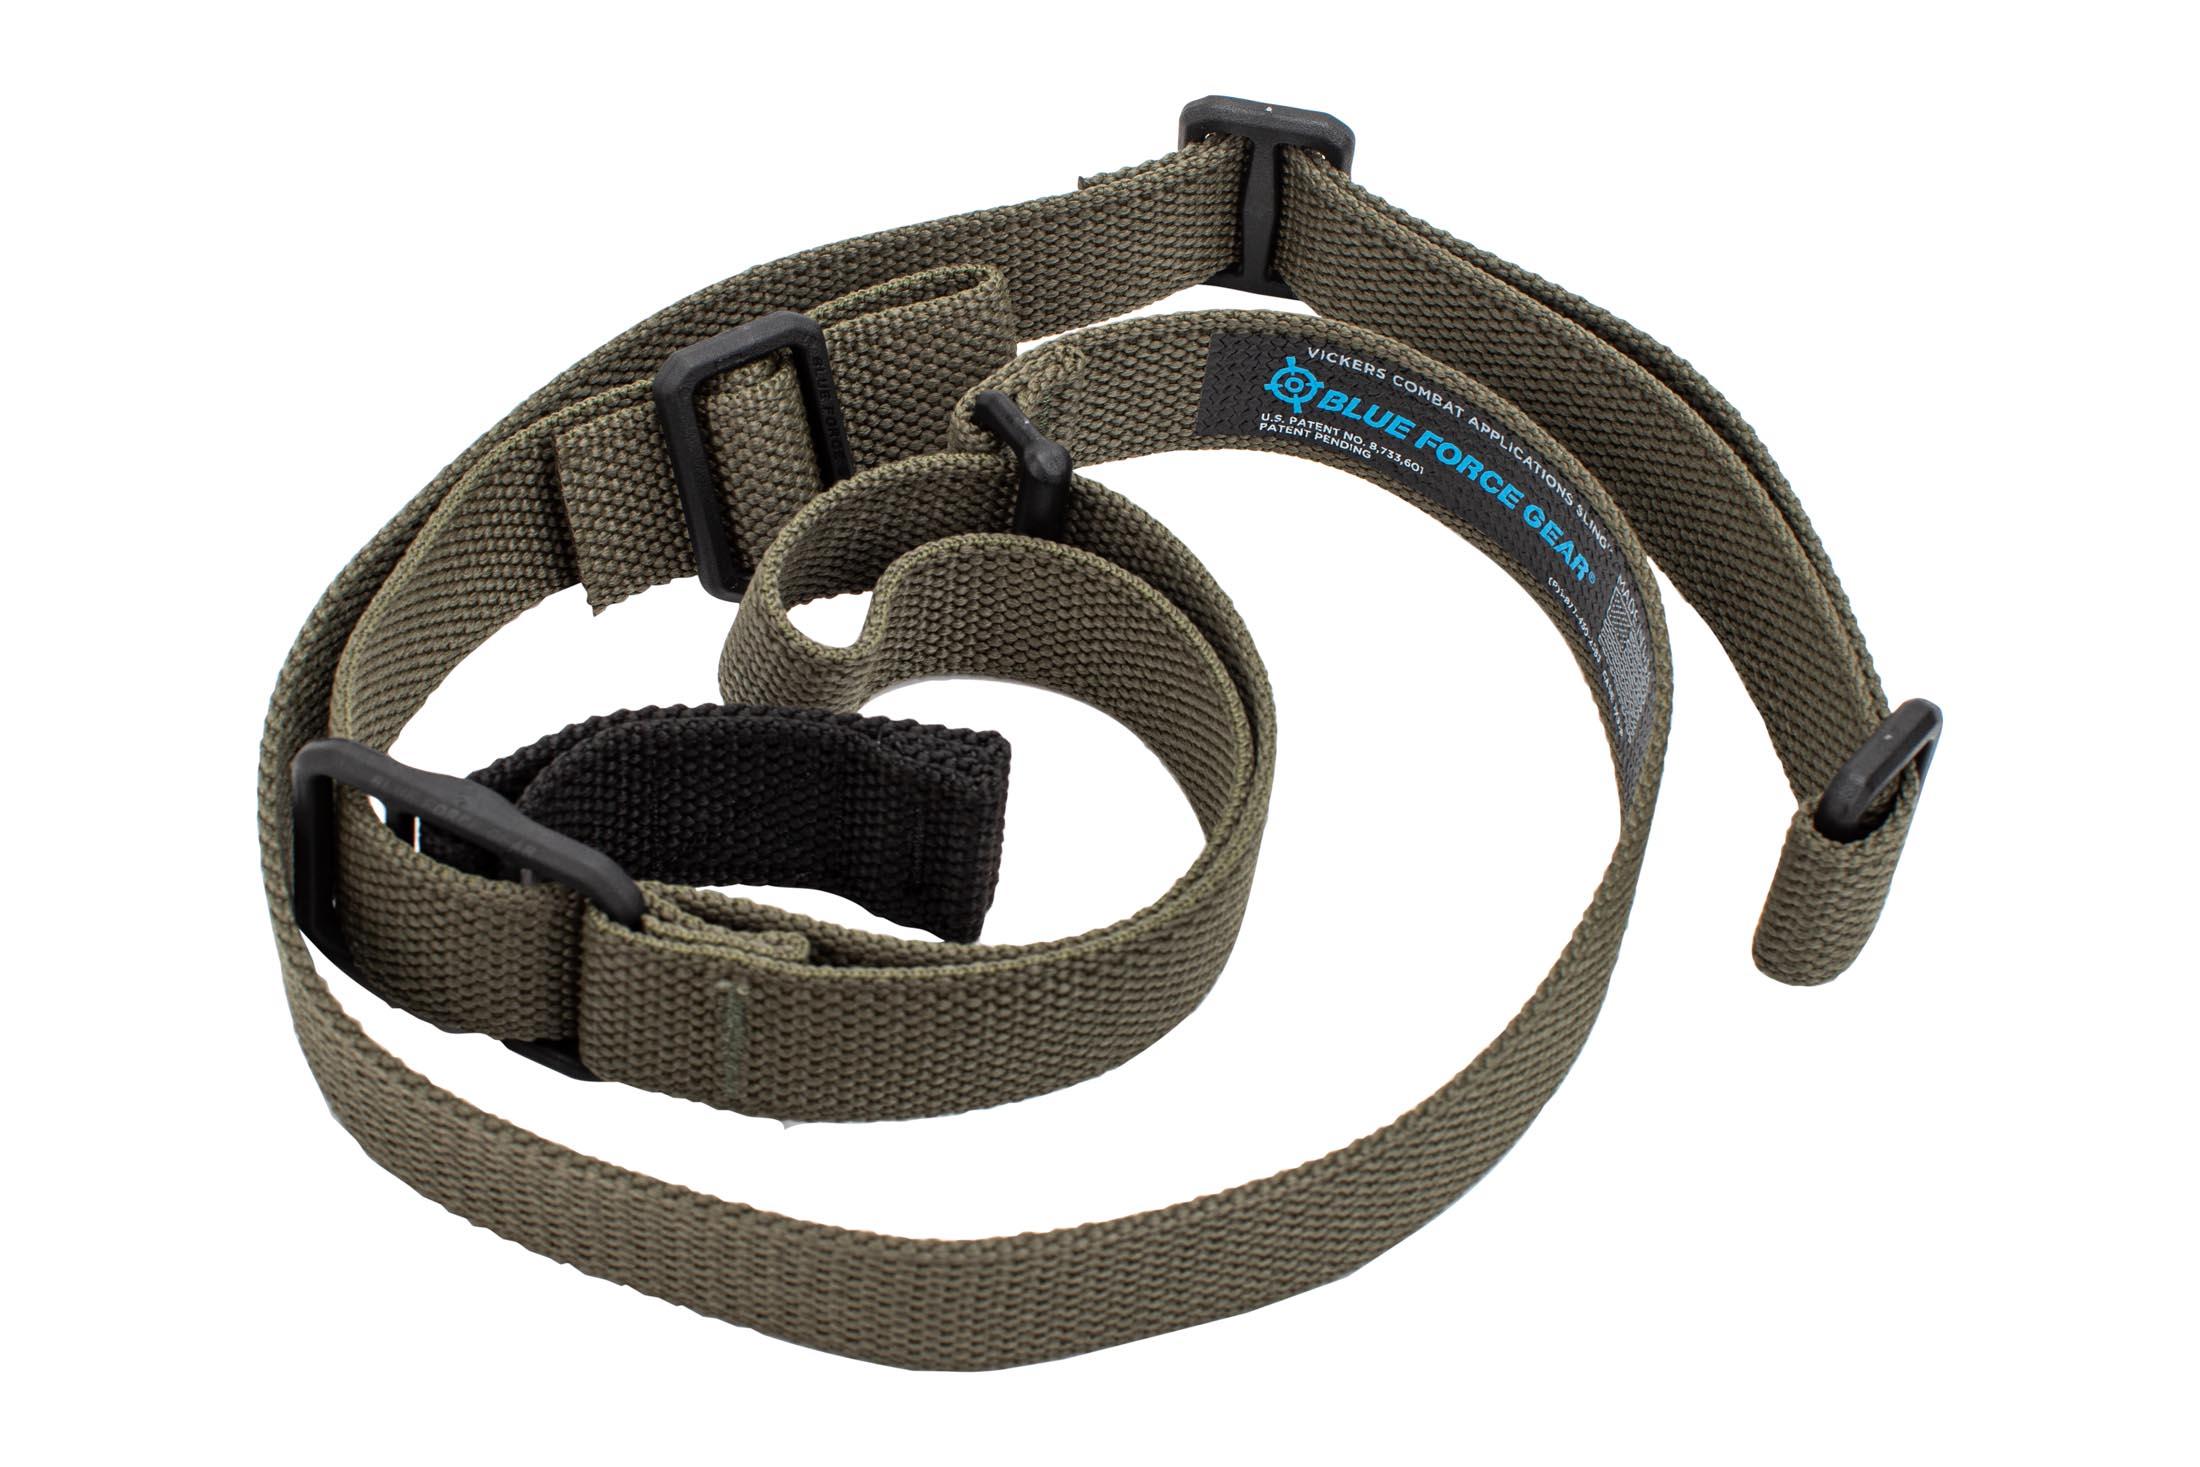 Blue Force Gear VCAS Vickers 2-Point Combat Sling - Ranger Green